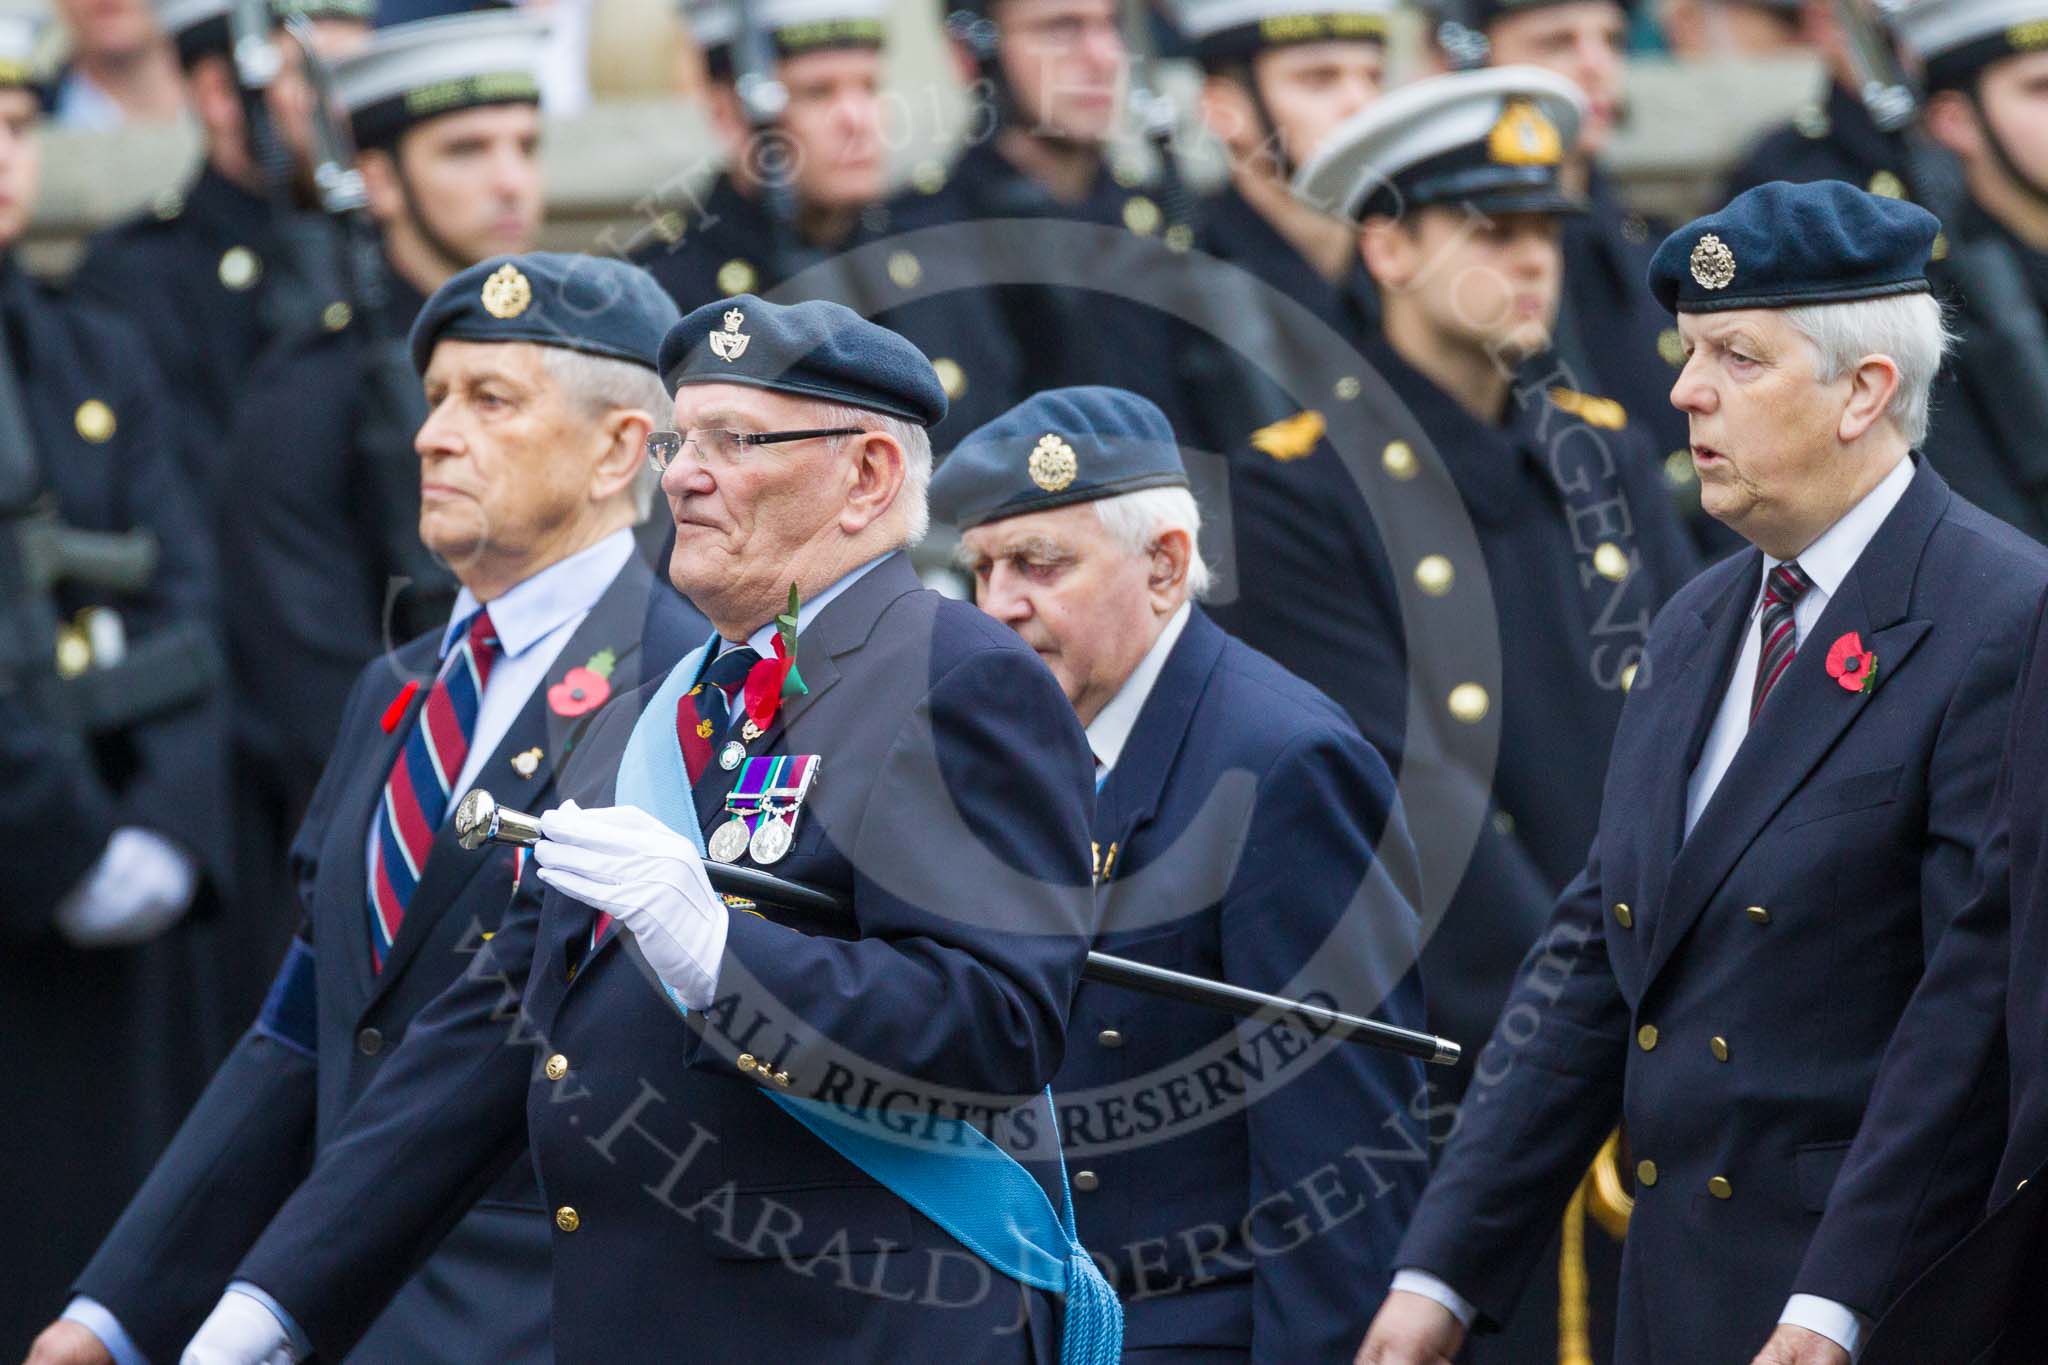 Remembrance Sunday at the Cenotaph 2015: Group C5, National Service (Royal Air Force) Association.
Cenotaph, Whitehall, London SW1,
London,
Greater London,
United Kingdom,
on 08 November 2015 at 11:48, image #456